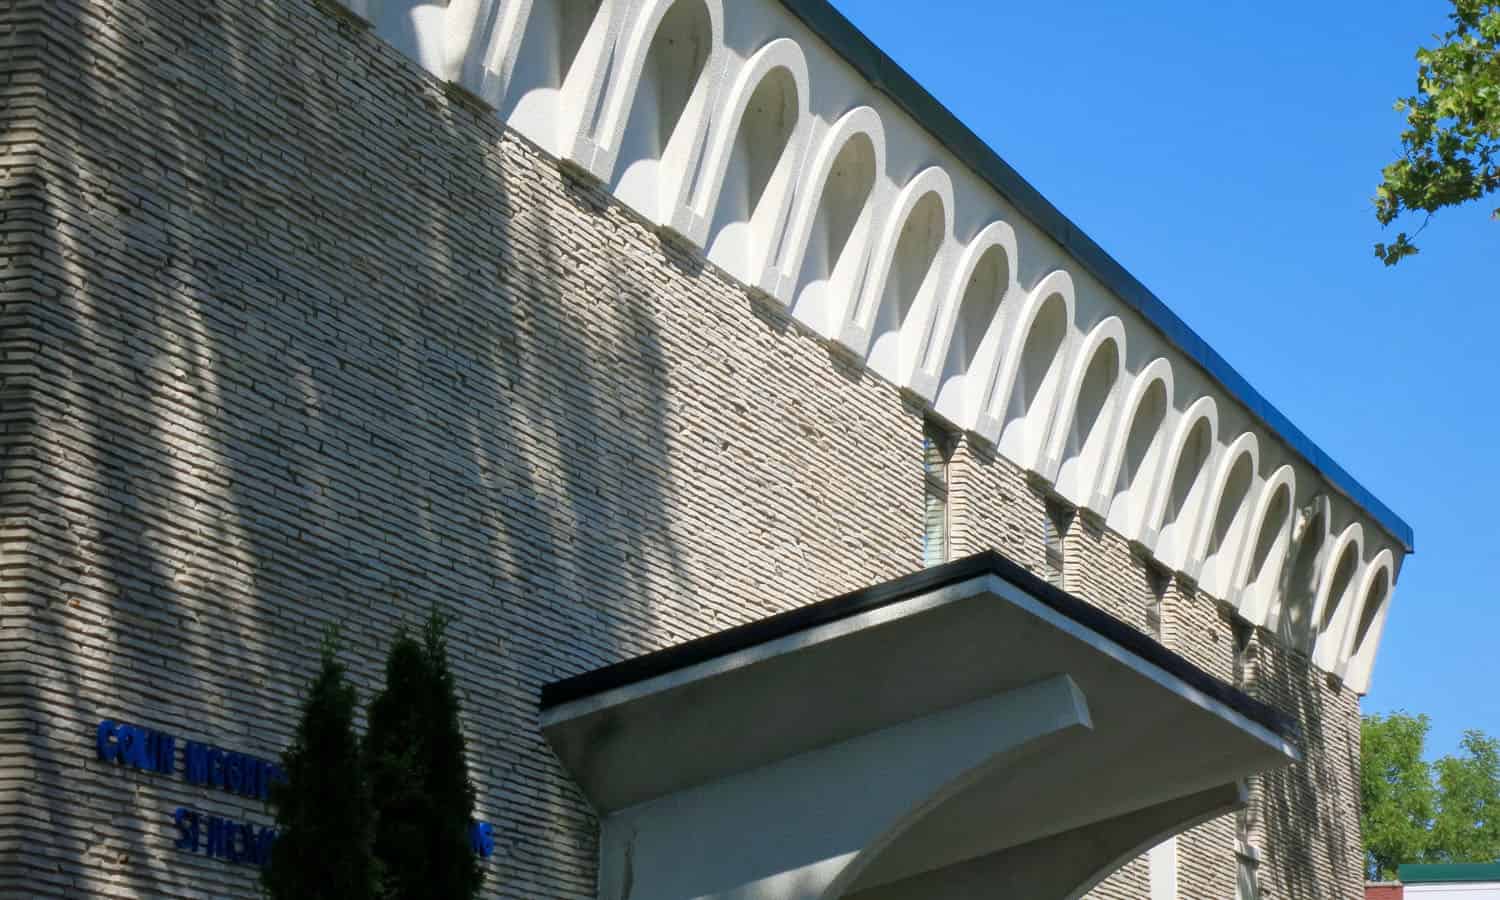 The character-defining stone cladding, concrete entablature, and expressive portico are associated with New Formalism